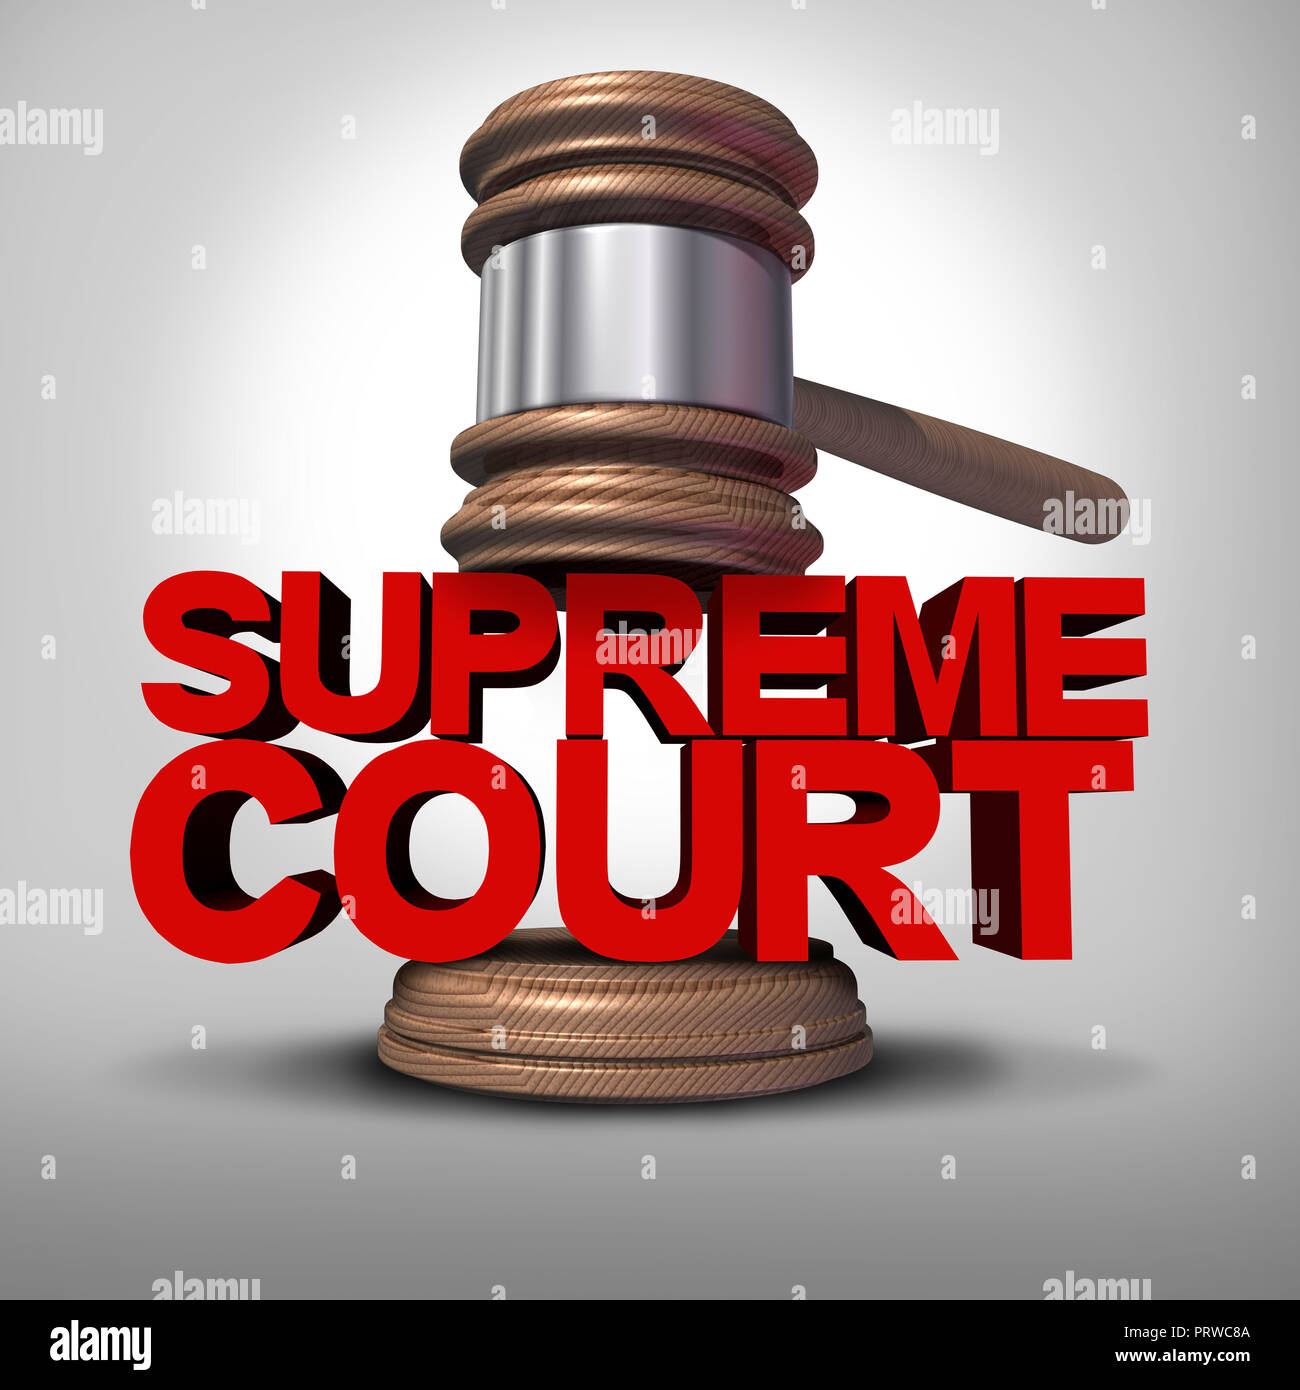 Supreme court symbol as a government law symbol as a justice judge gavel on text as a 3D illustration. Stock Photo